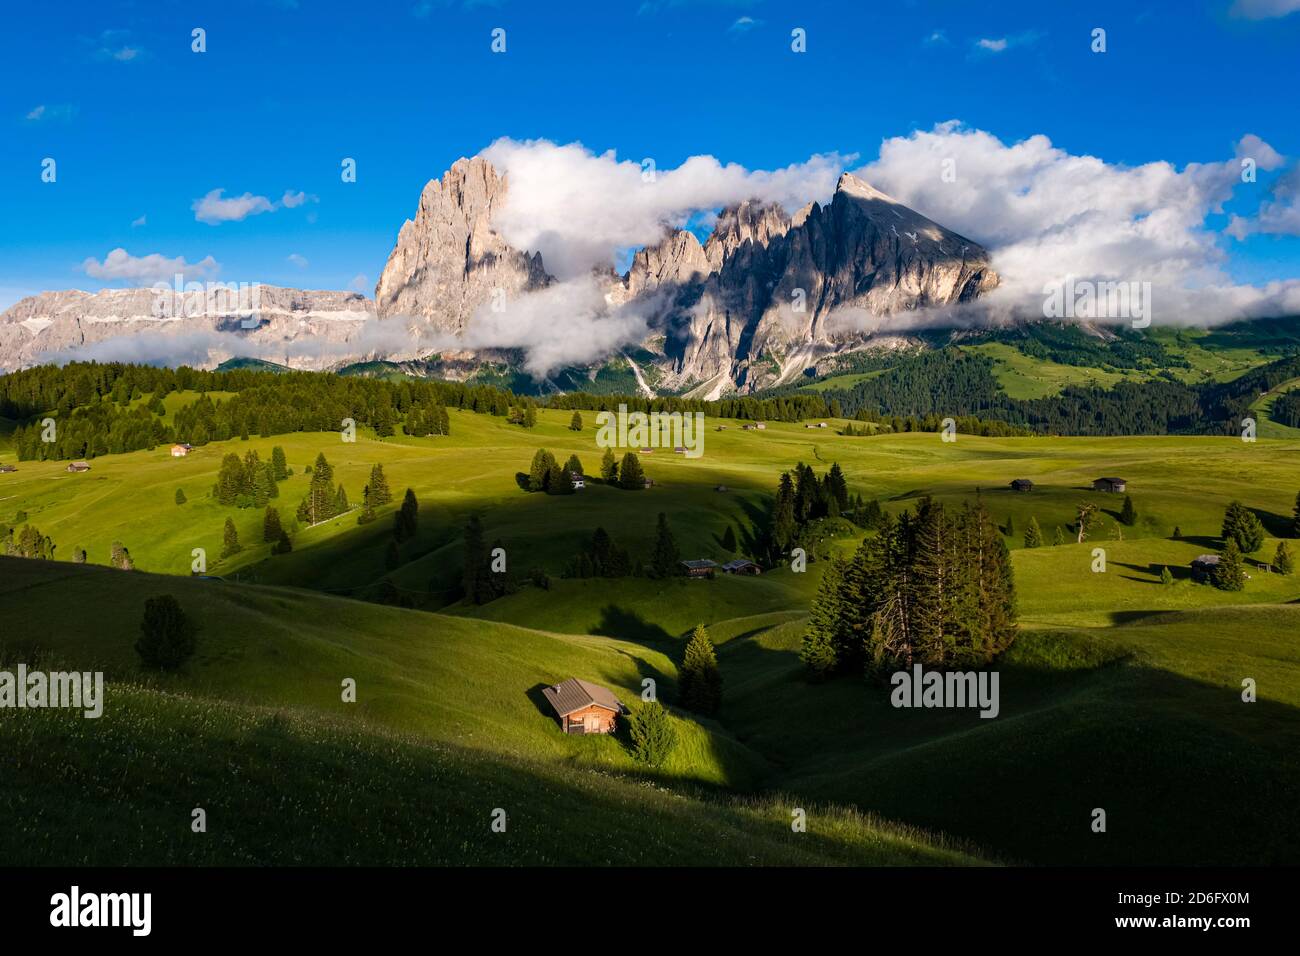 Hilly agricultural countryside with green pastures, trees and wooden huts at Seiser Alm, Alpe di Siusi, the mountain Plattkofel, Sasso Piatto, surroun Stock Photo